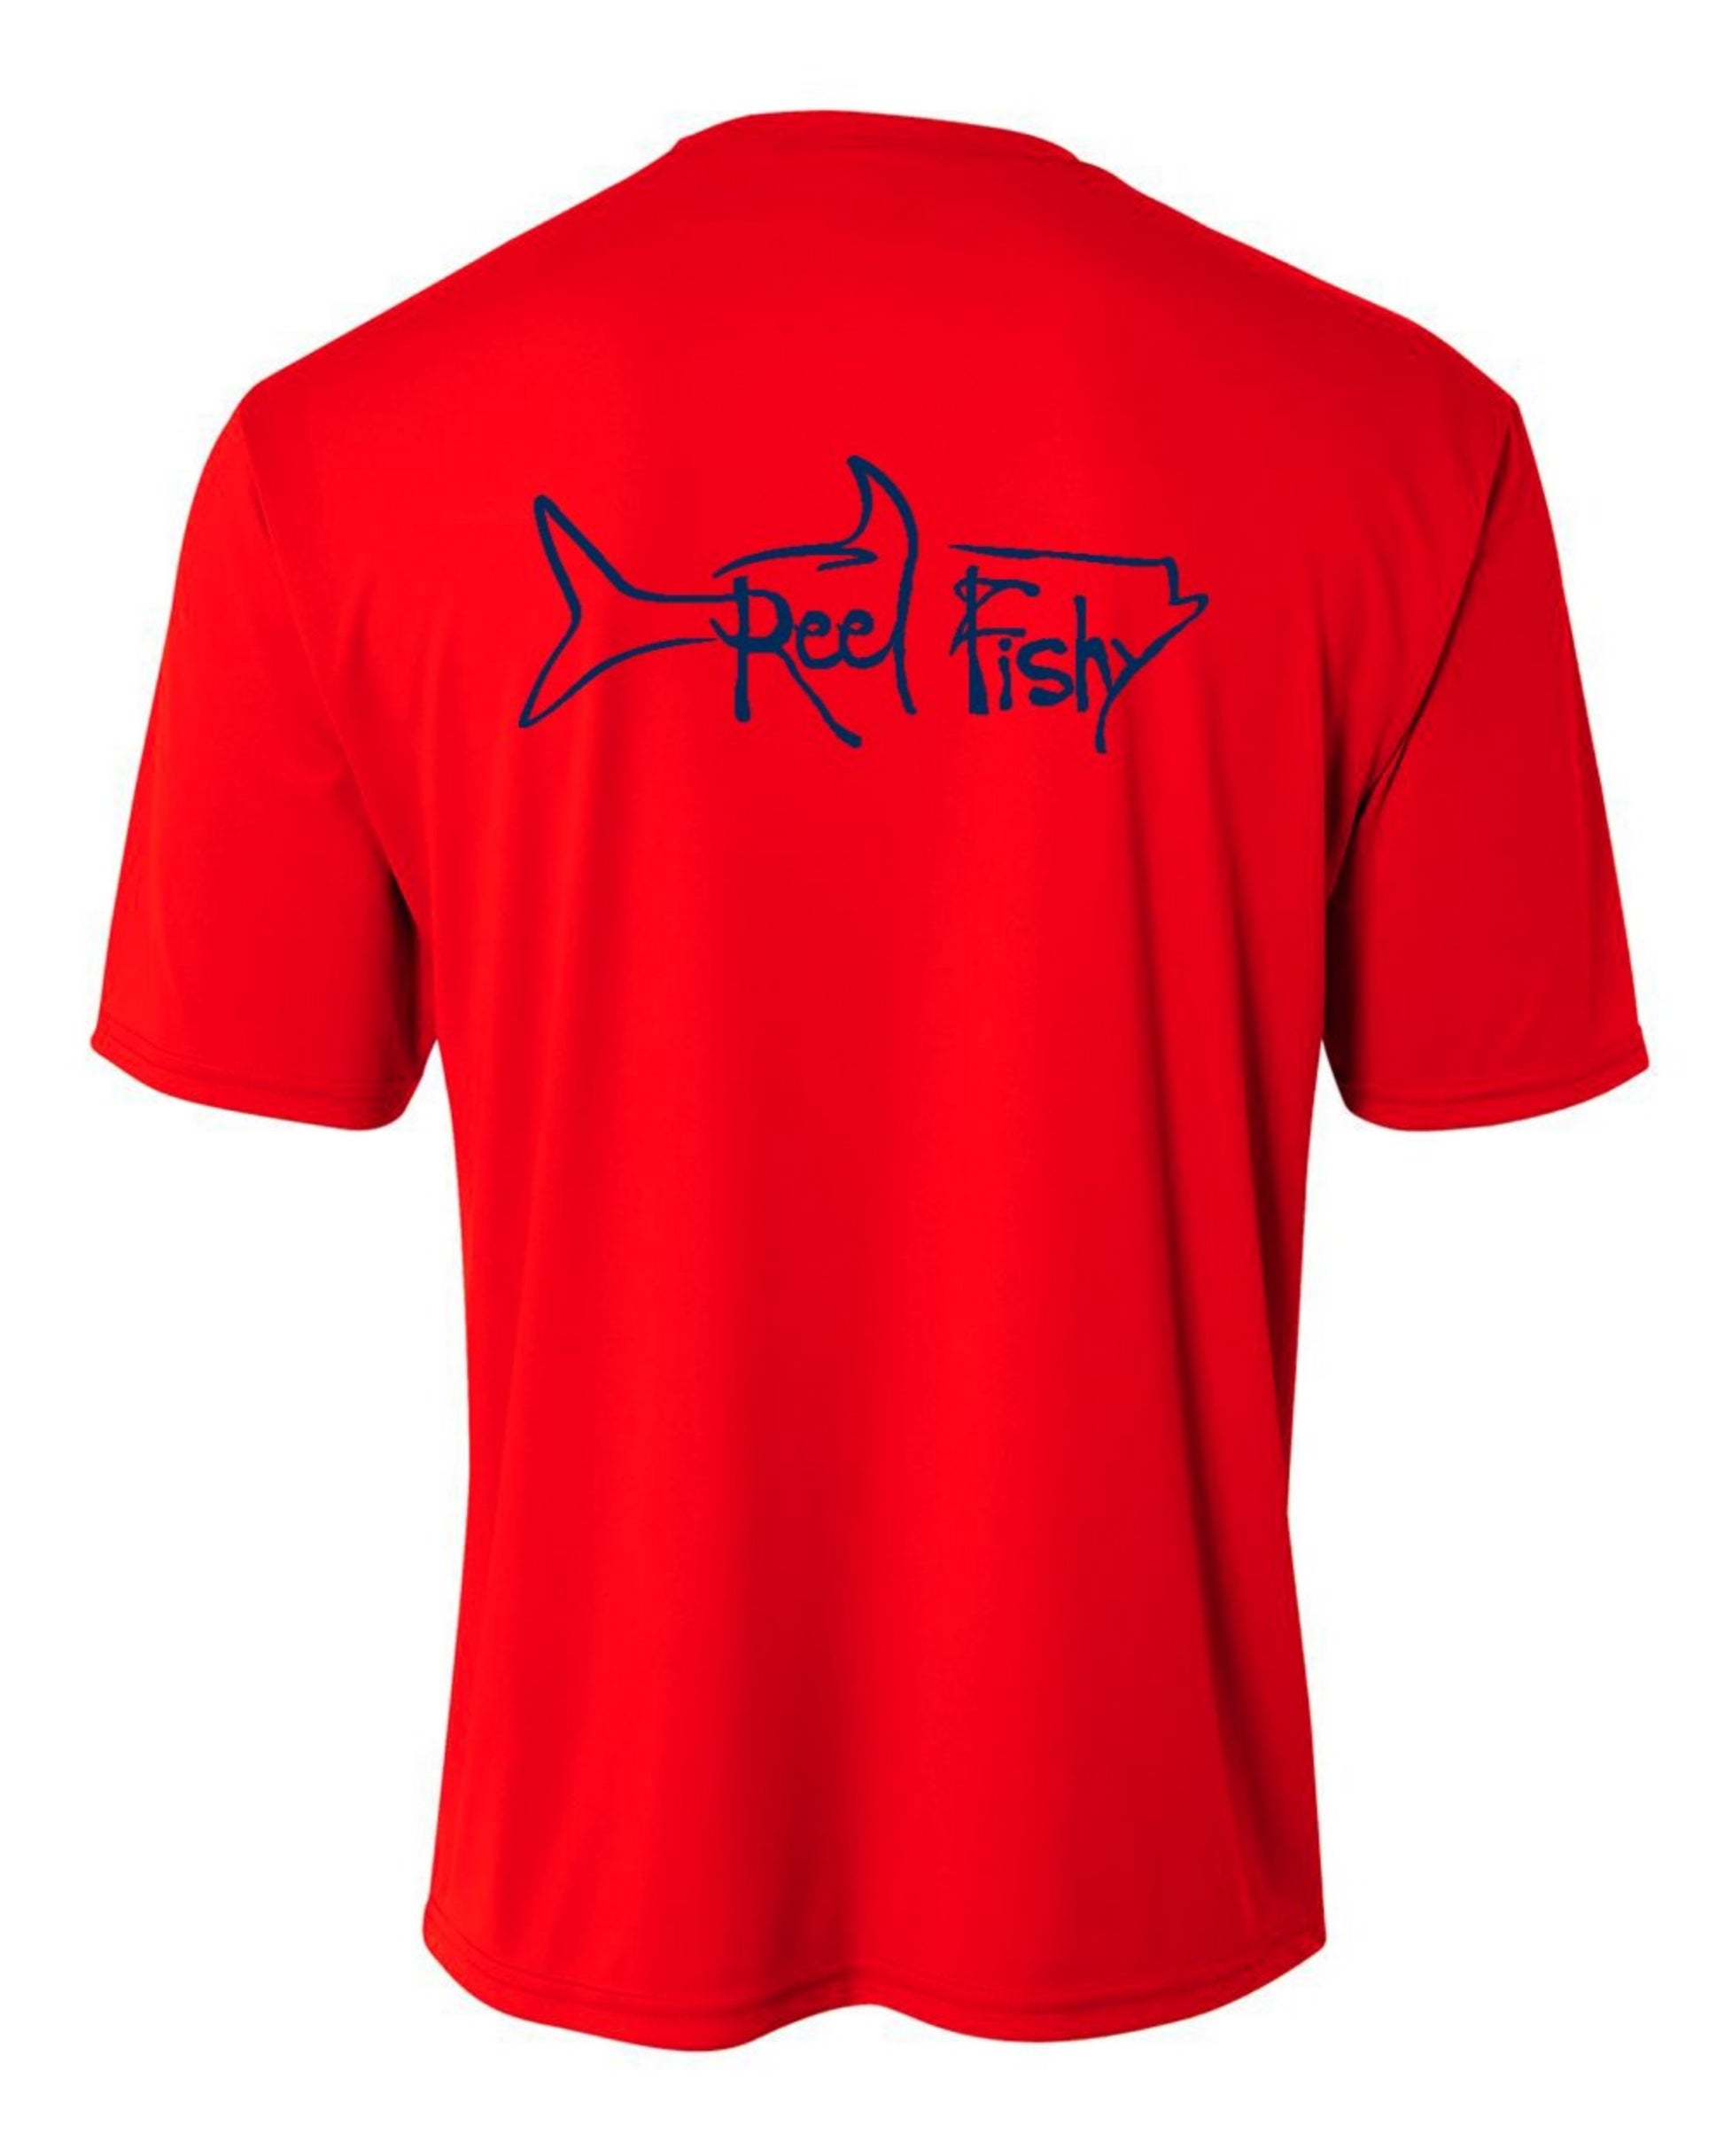 Youth Performance Dry-Fit Tarpon Fishing Shirts with Sun Protection by Reel Fishy Apparel - Short Sleeve Red